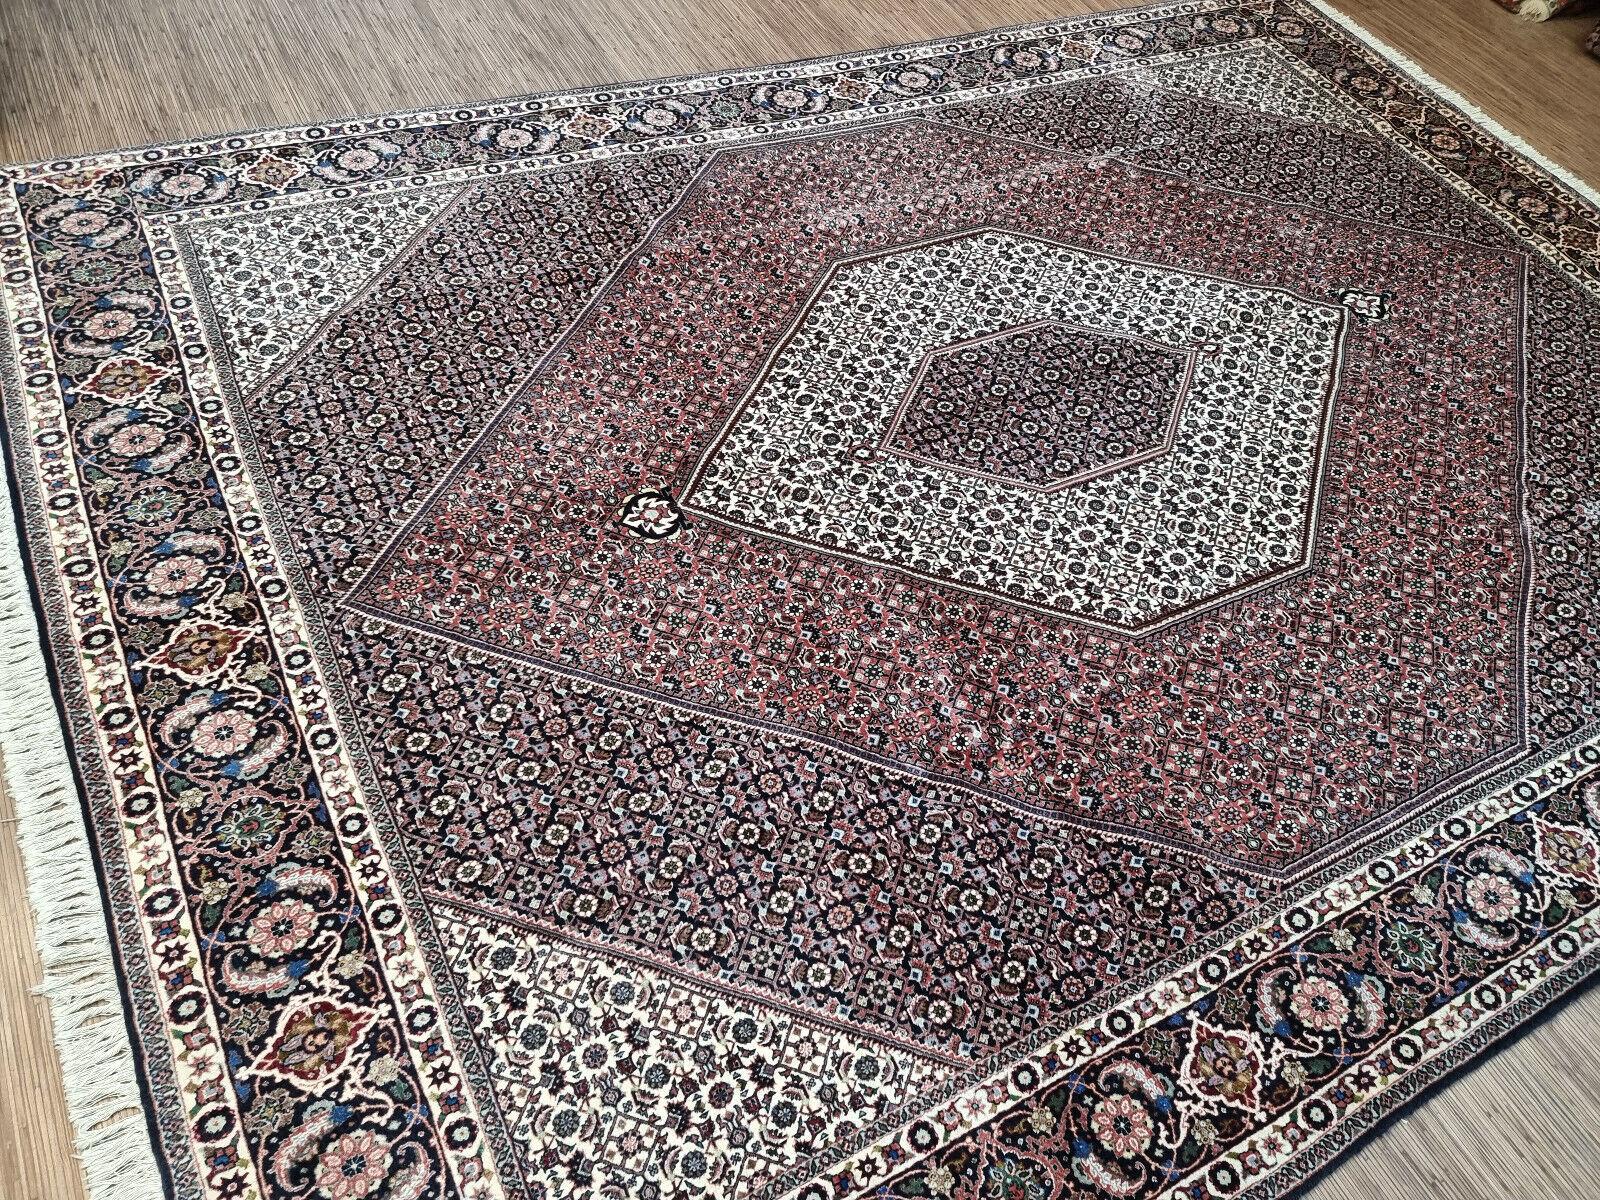 Handmade Vintage Persian Style Bidjar Rug 8.2' x 11.2', 1970s - 1D71 In Good Condition For Sale In Bordeaux, FR